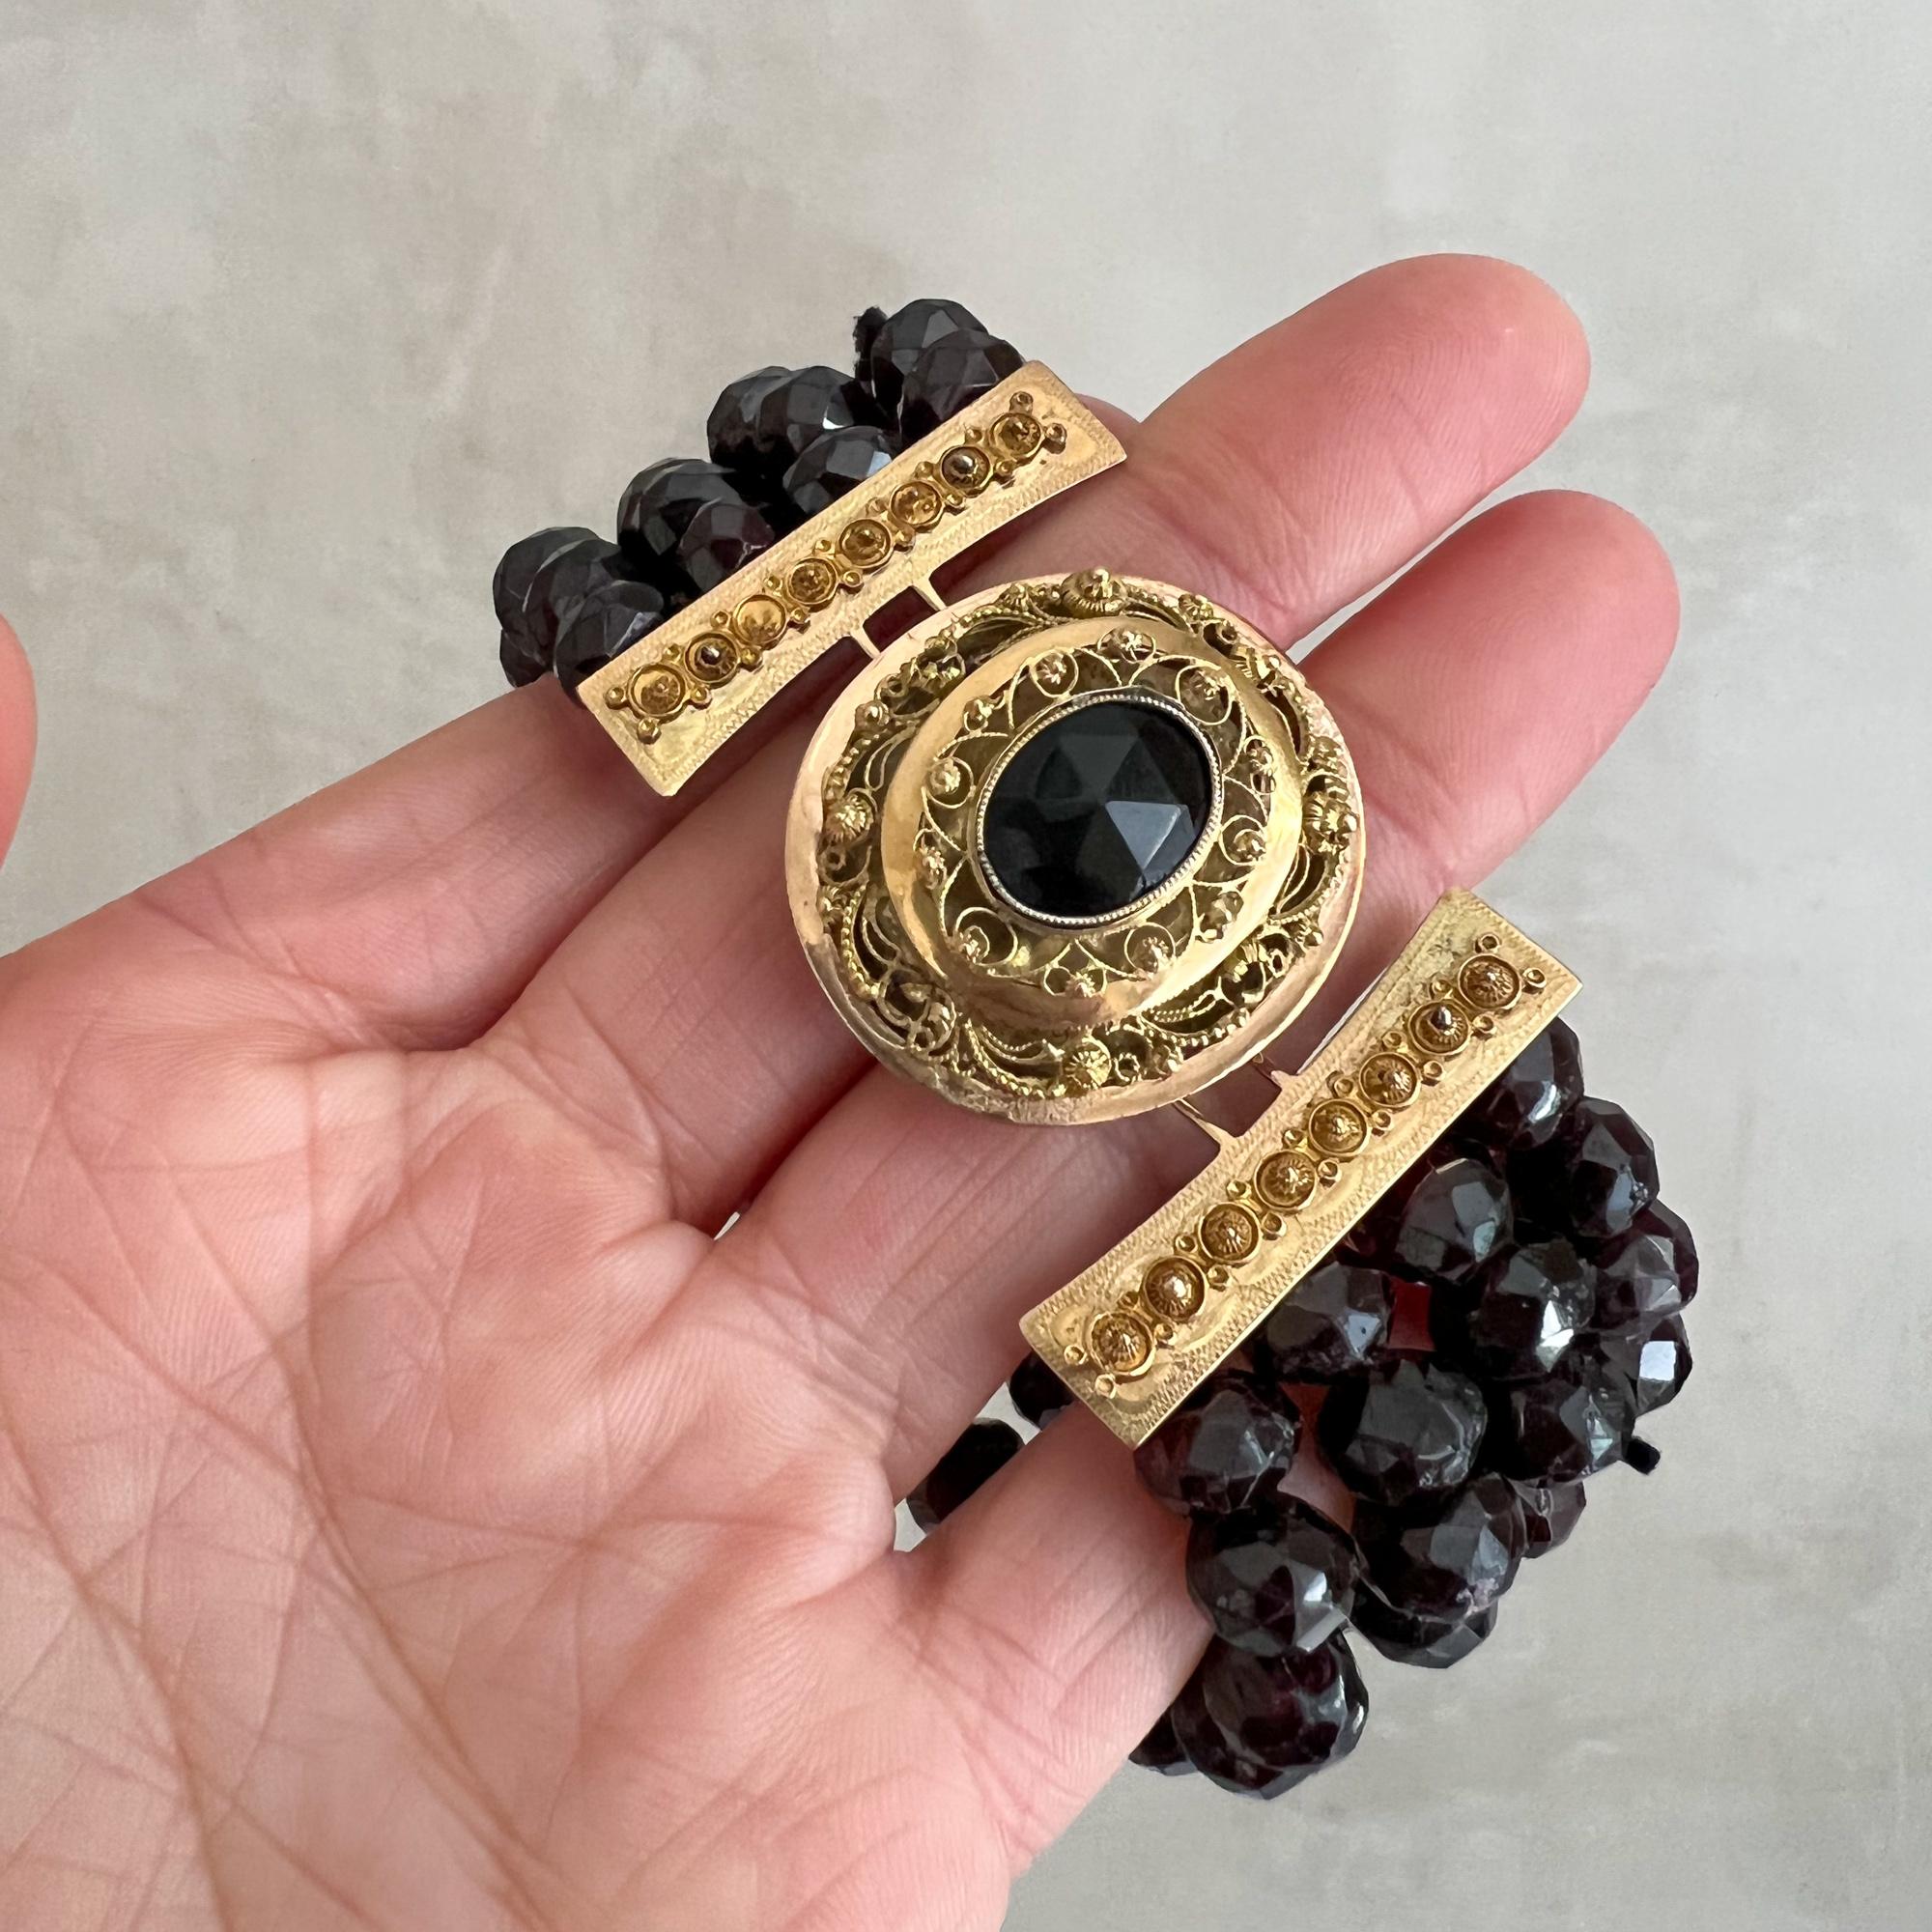 This is an antique 14 karat gold multi-strand beaded garnet bracelet. The bracelet is made of four strands and made with a beautifully handmade golden filigree clasp. In the center of the clasp a large oval-shape garnet stone is set in gold bezel